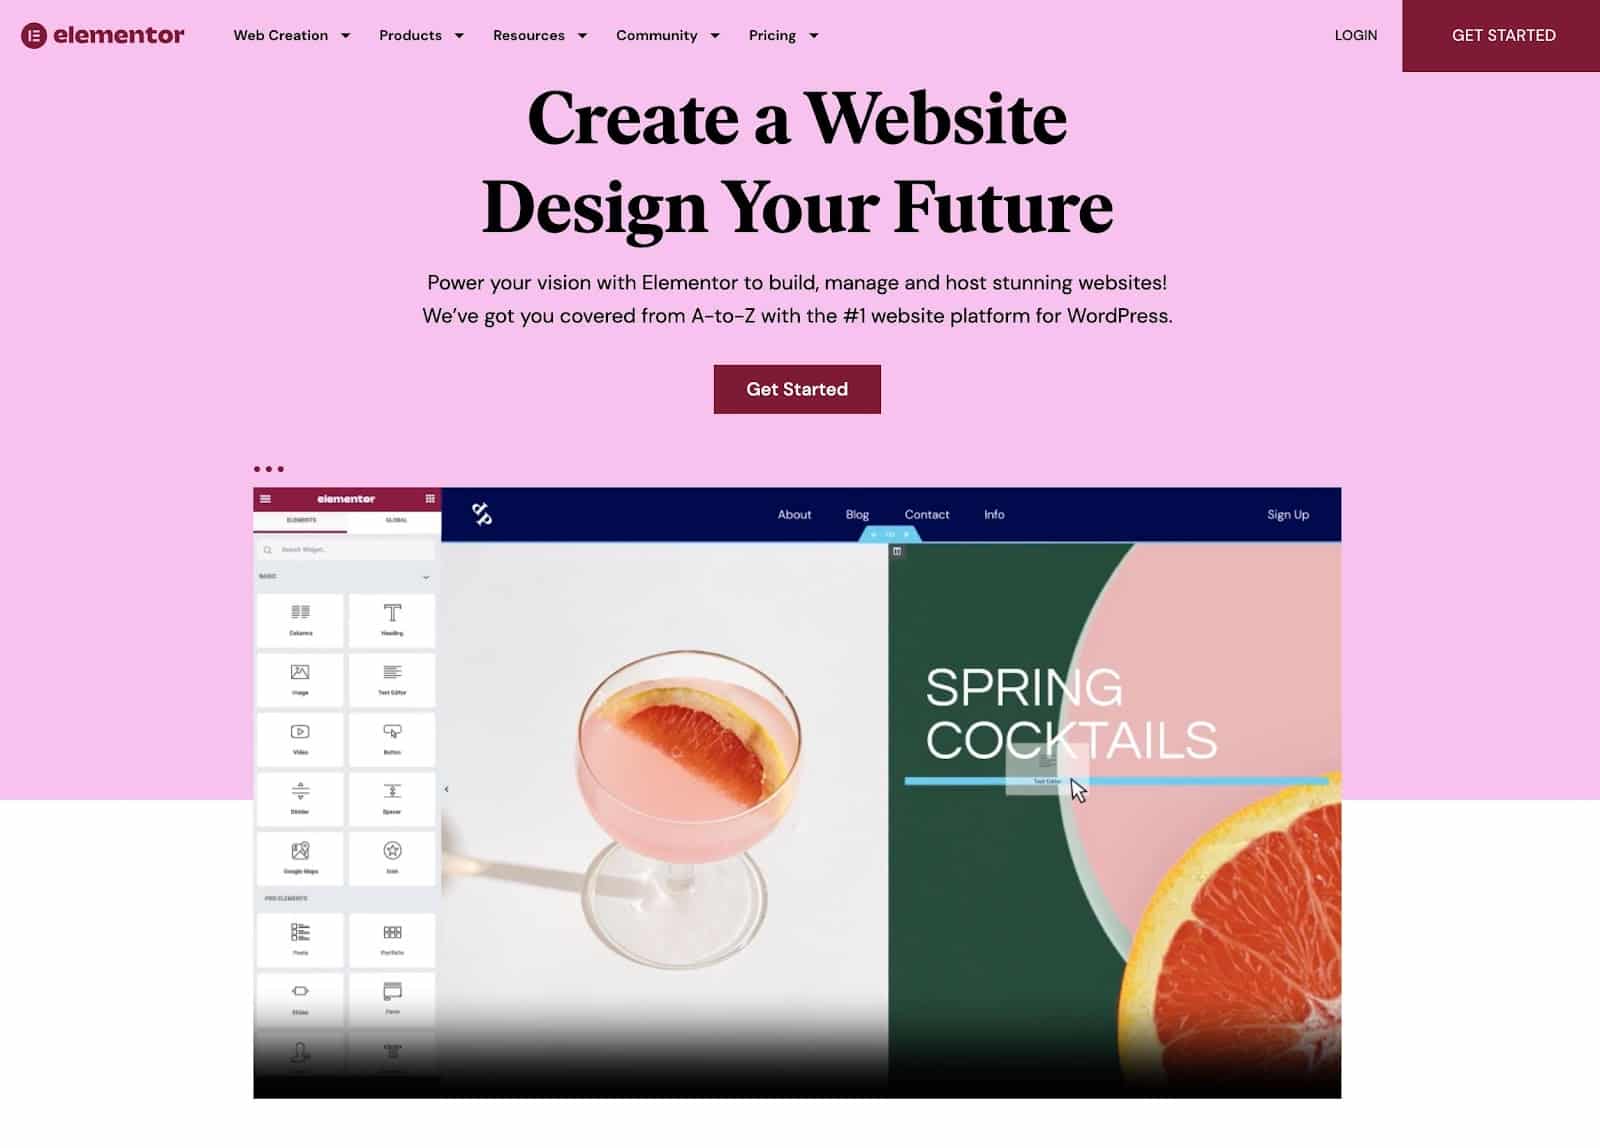 Create a website and design your future